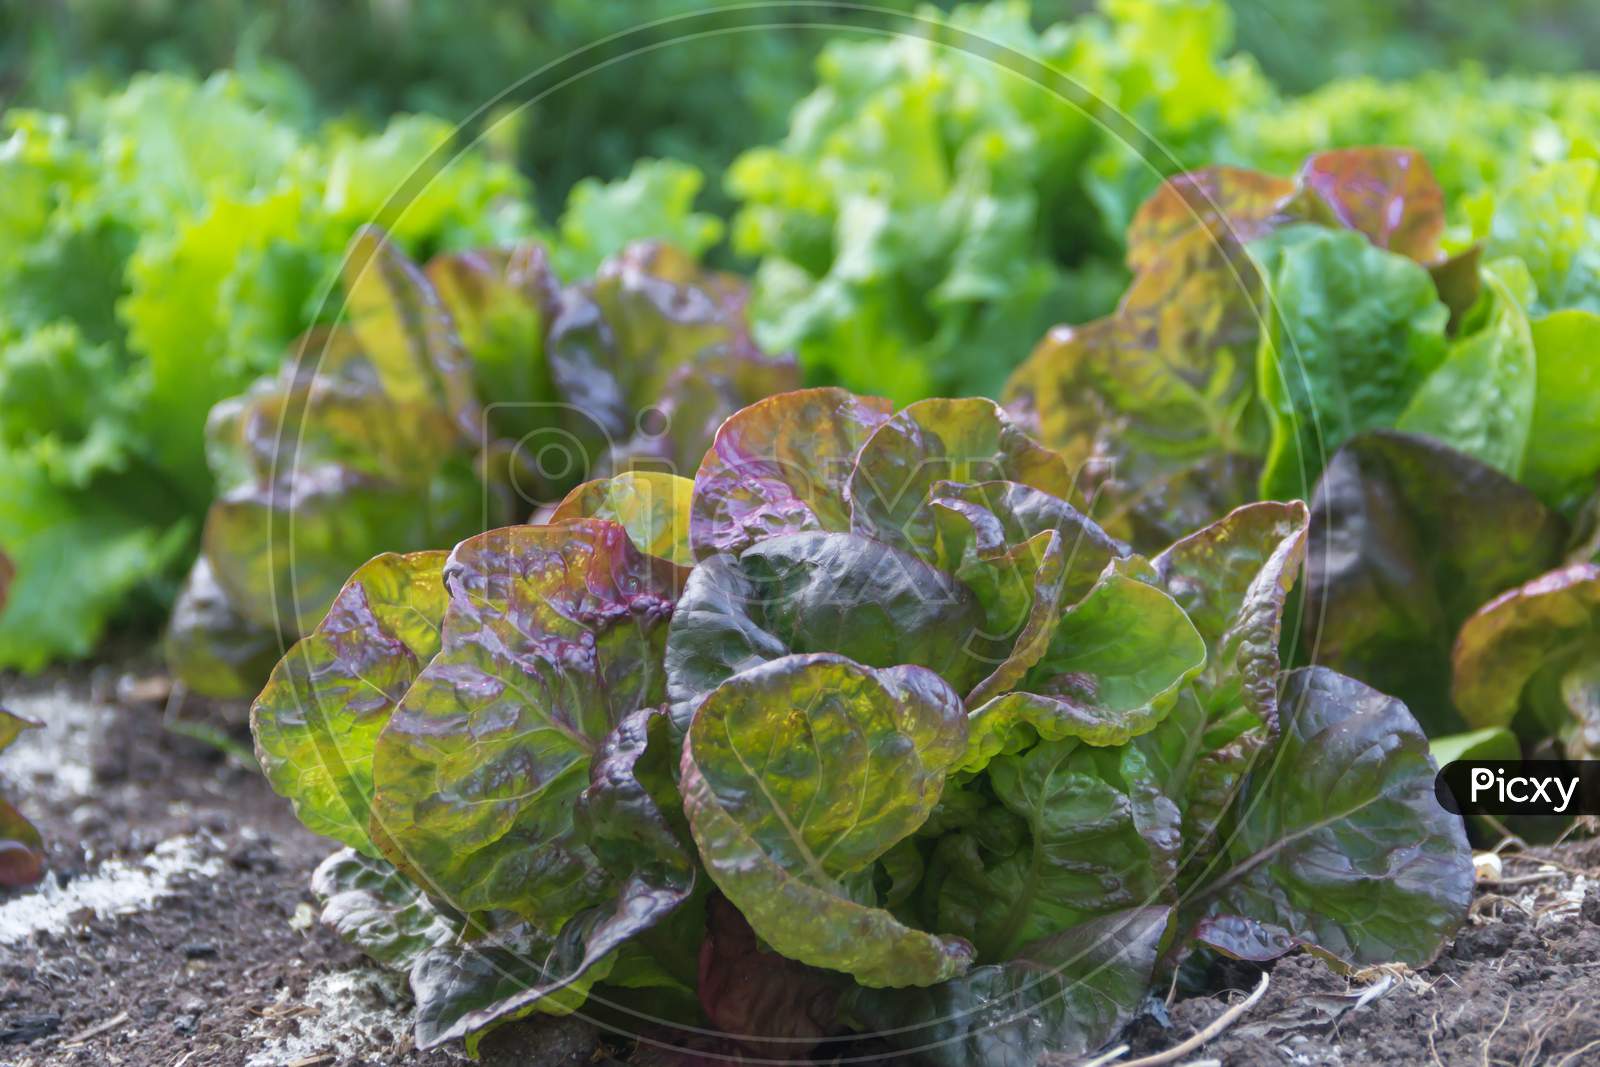 Green And Purple Curly Lettuce Leaves In The Organic Garden